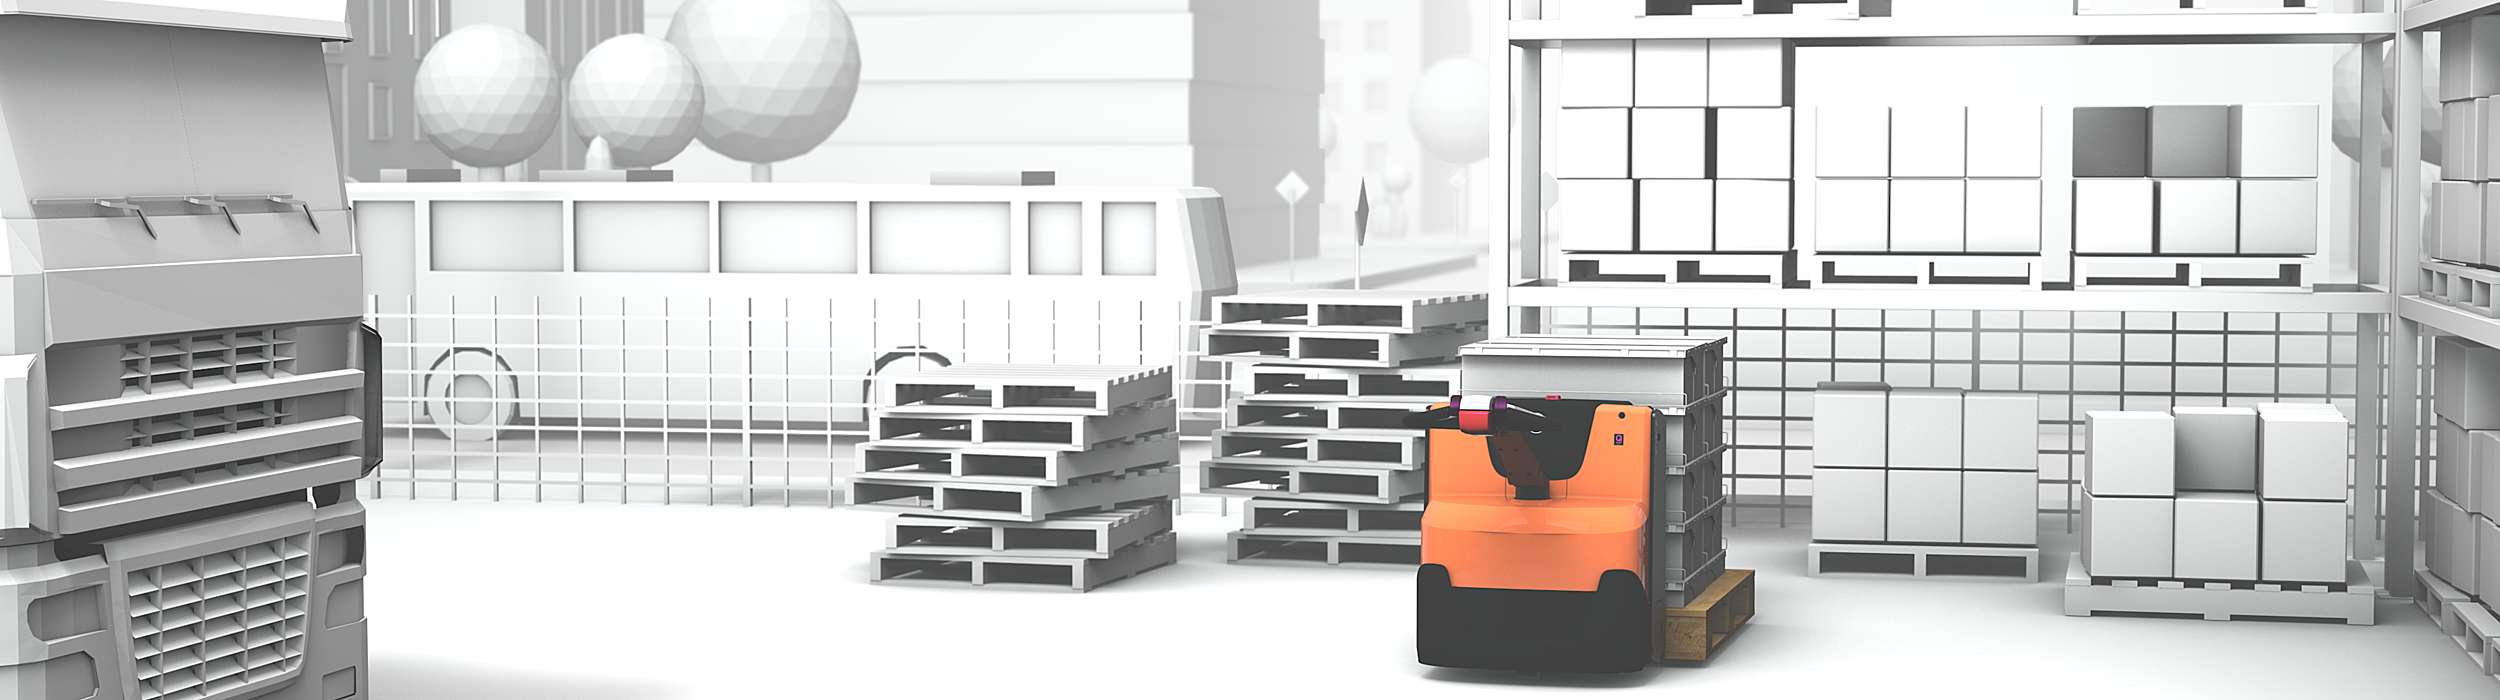 Illustration of silent truck in warehouse